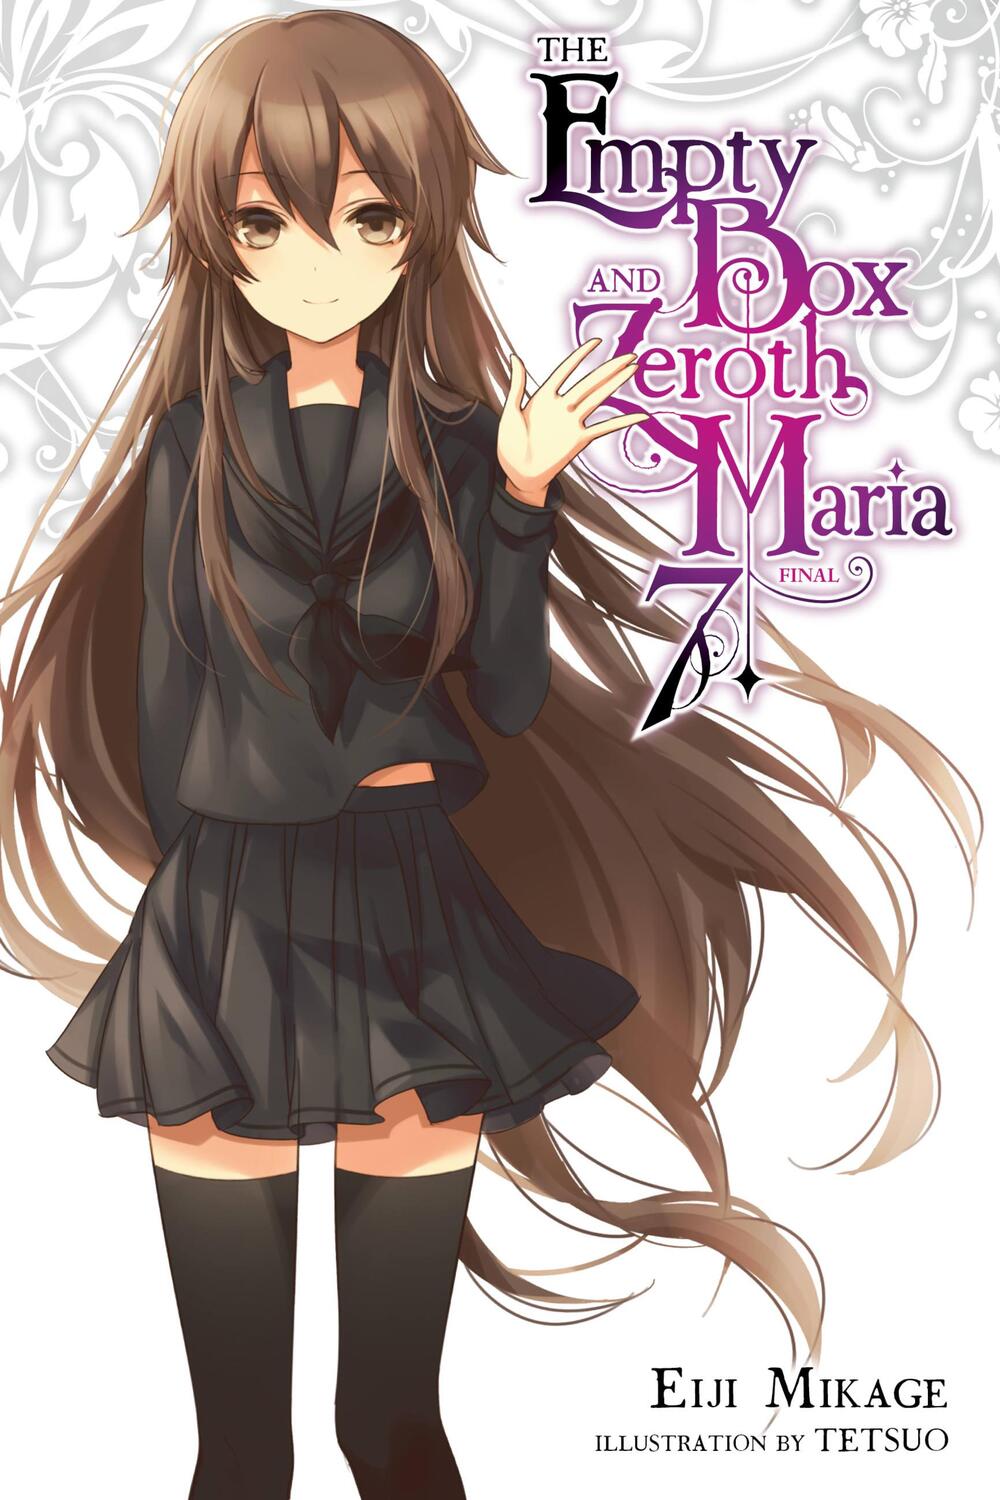 Cover: 9780316561211 | The Empty Box and Zeroth Maria, Vol. 7 (light novel) | Eiji Mikage